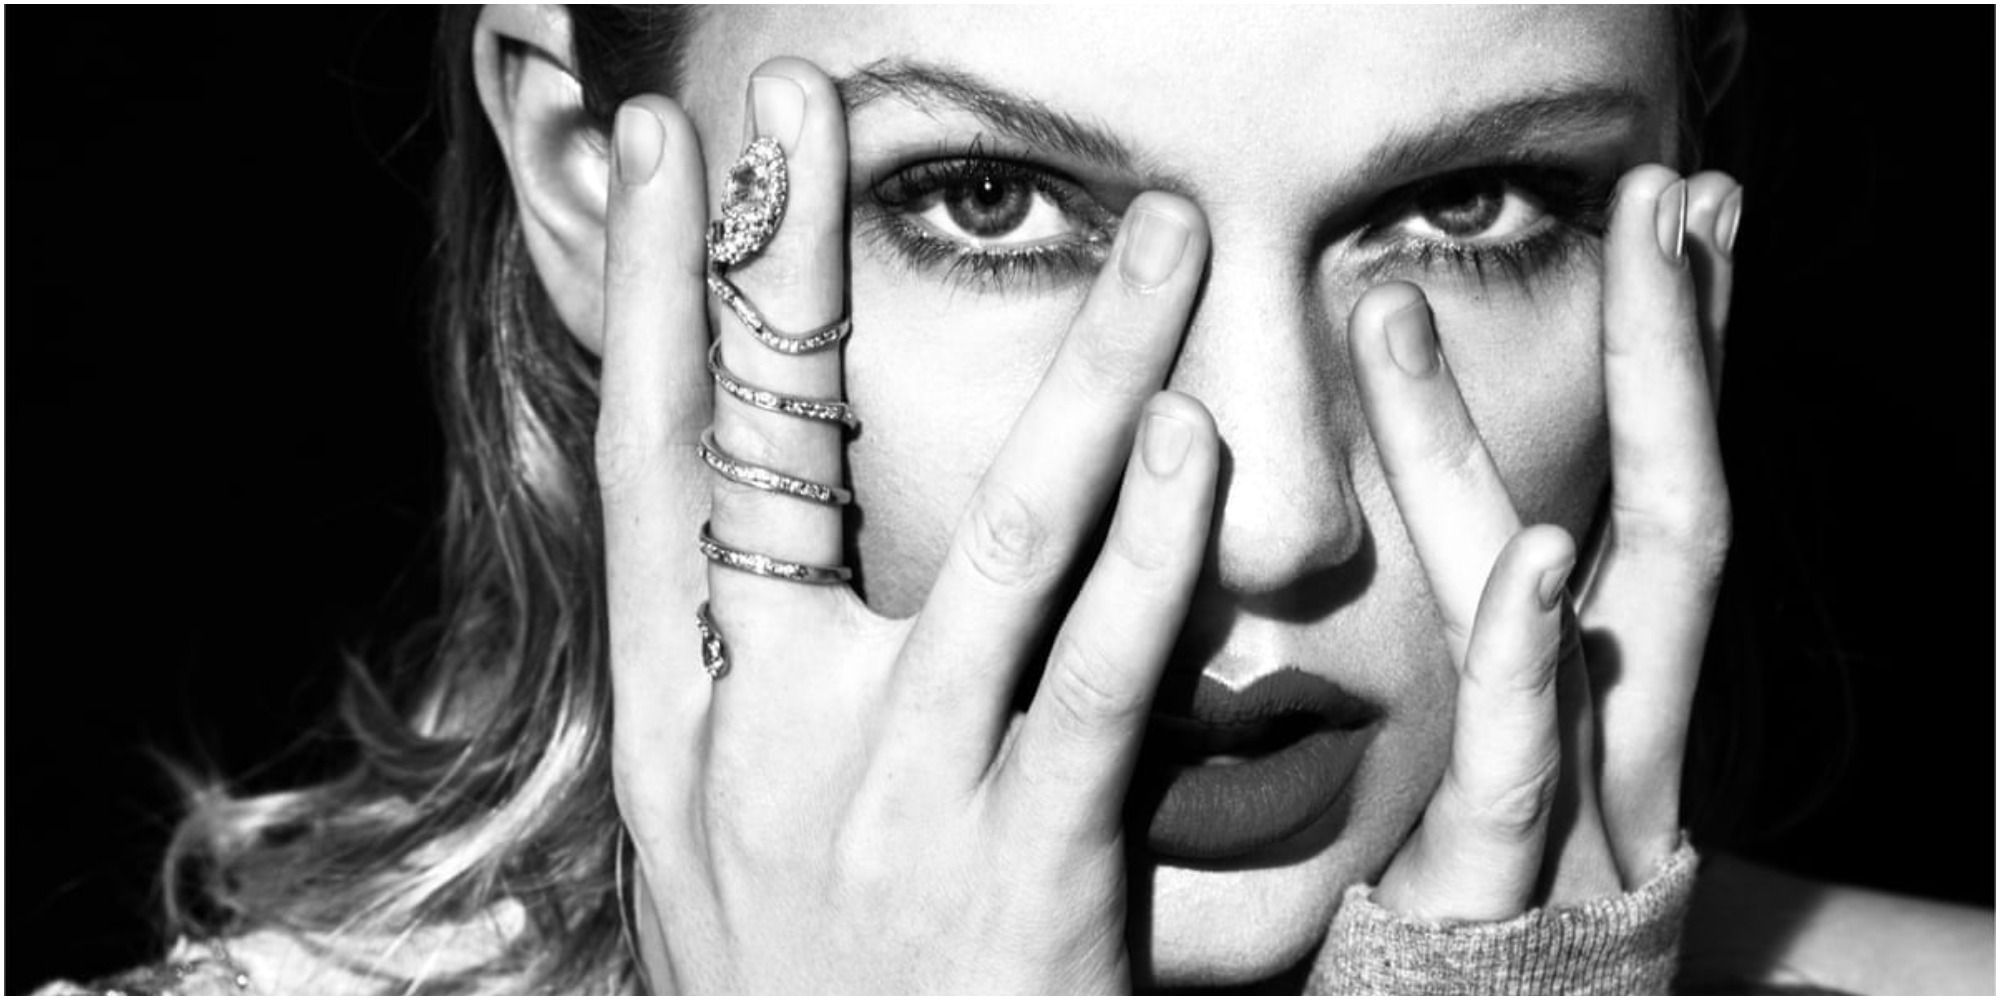 taylor swift holding her face in reputation promo image